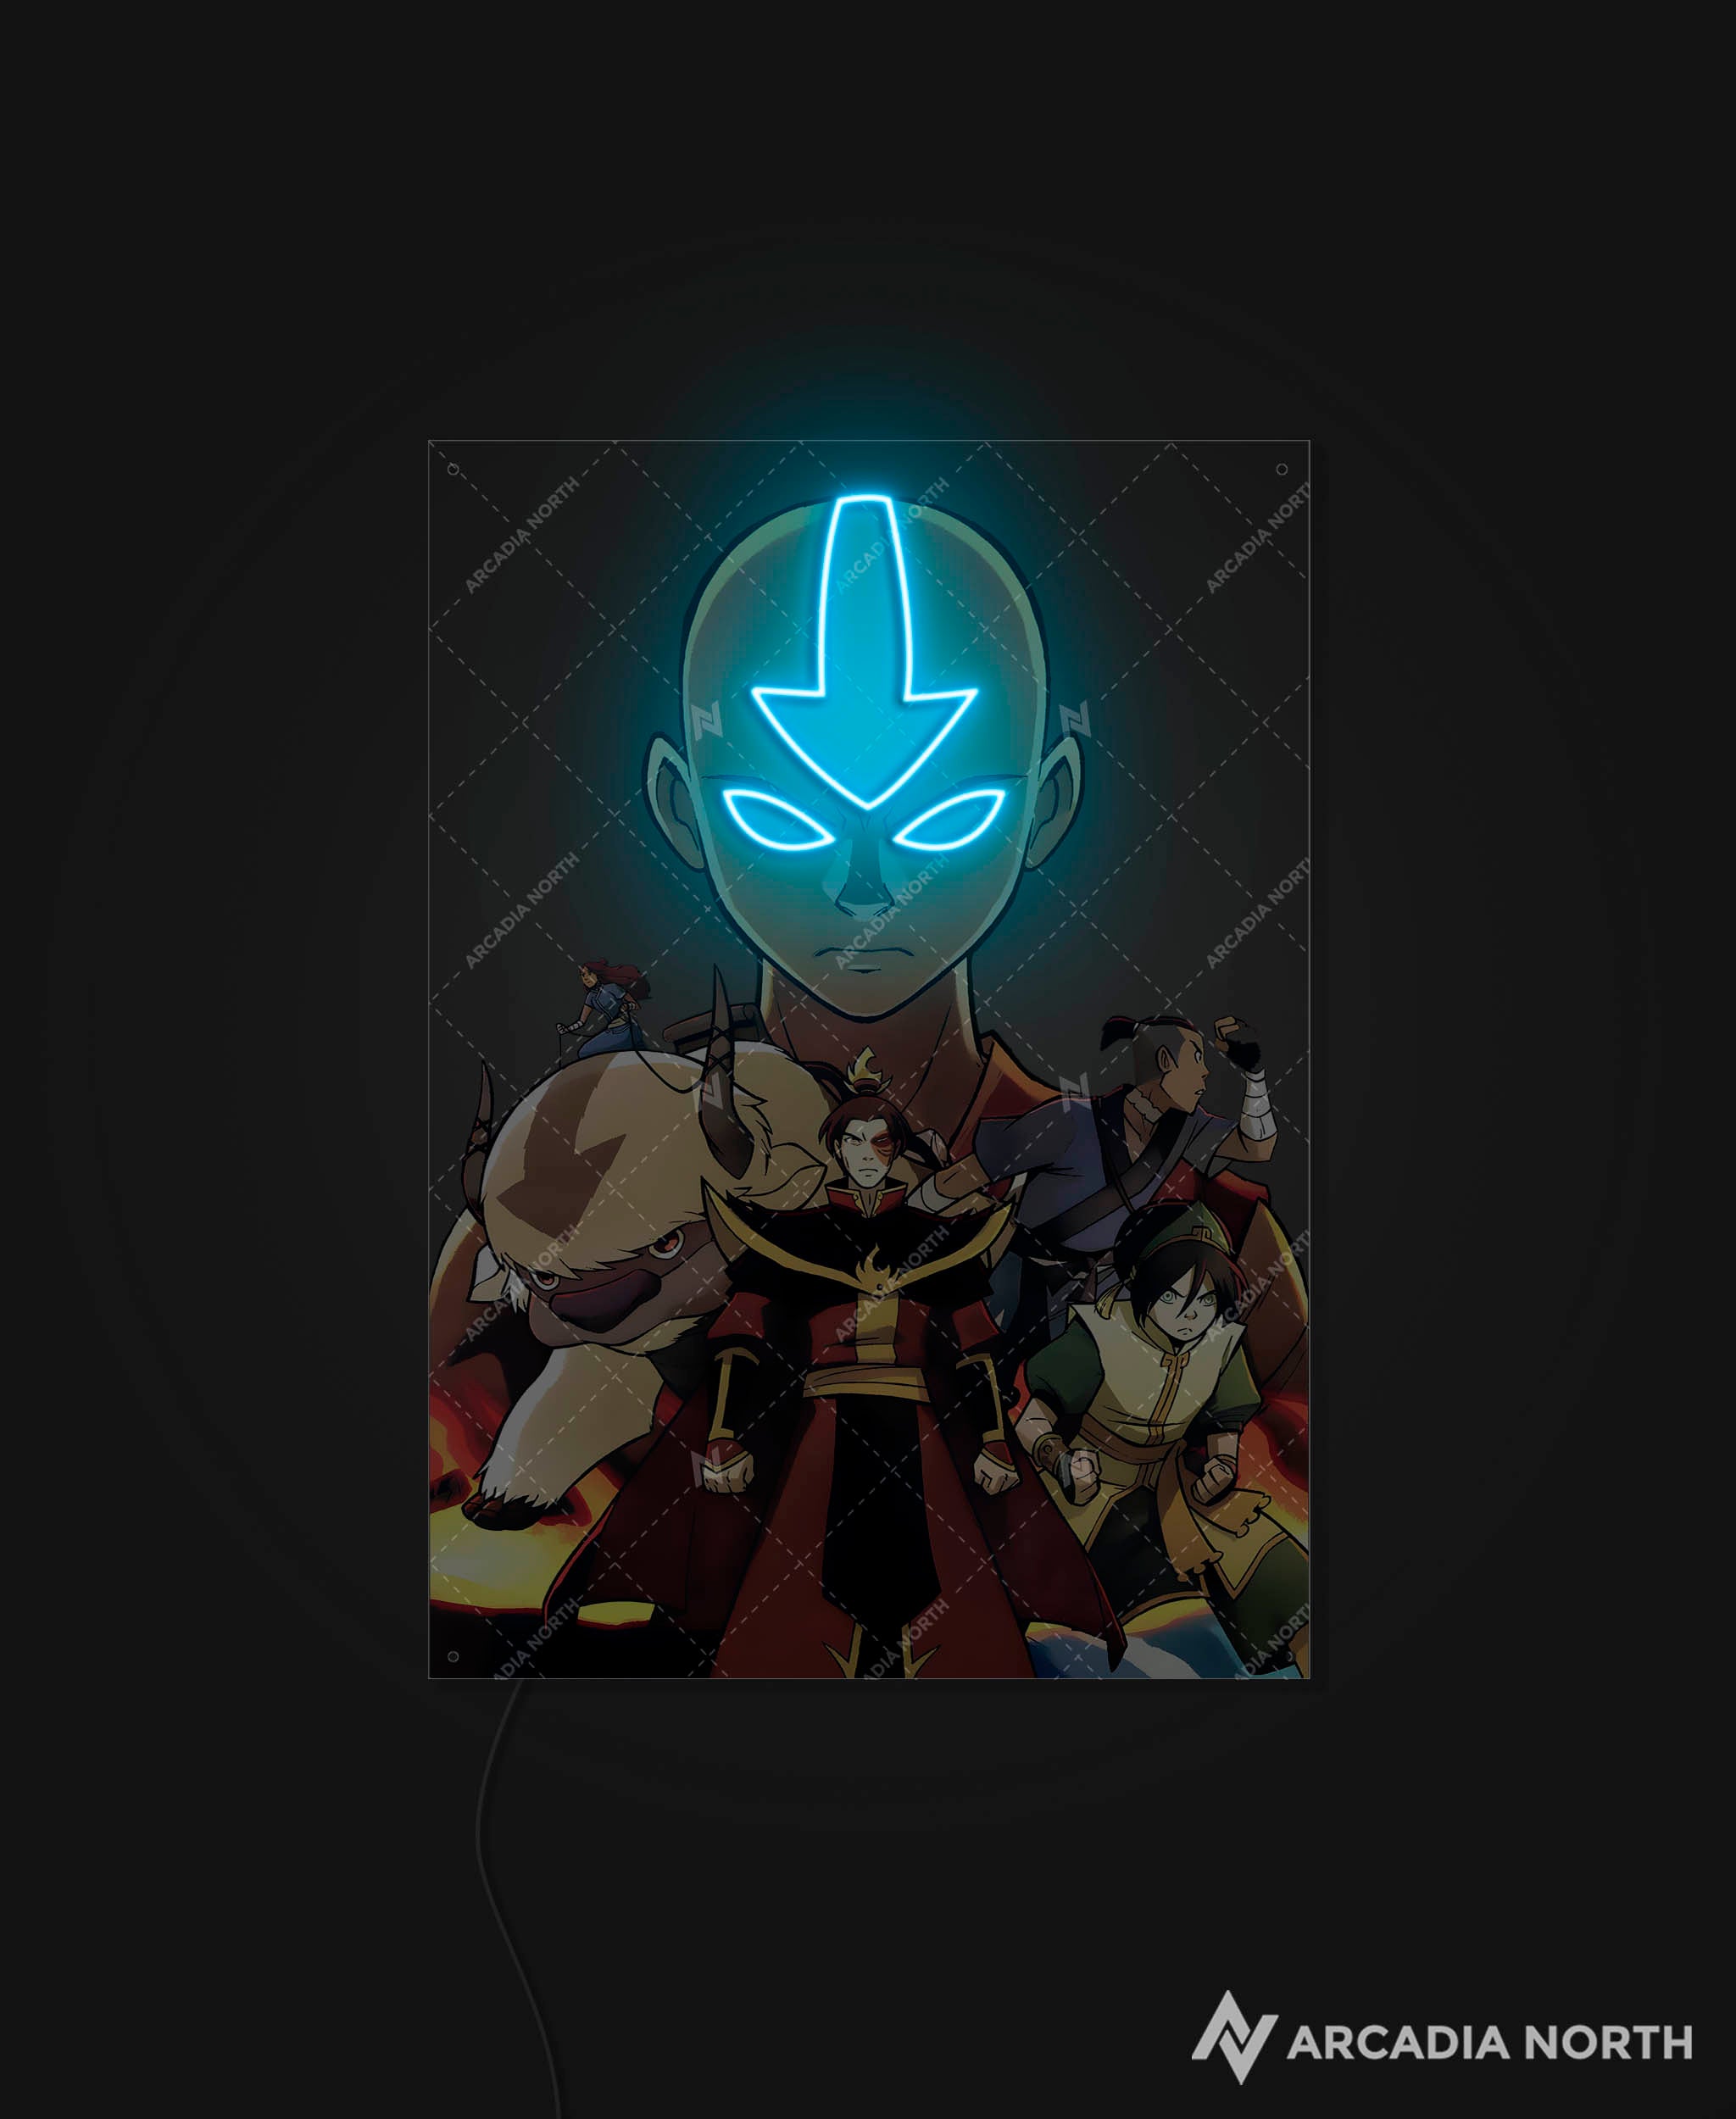 Arcadia North AURALIGHT - an LED Poster featuring the anime Avatar The Last Airbender with Aang, Zuko, Appa, Sokka, Katara, and Toph. Aang and his arrow tattoo are Illuminated by glowing LED neon lights like The Avatar State. UV-printed poster on acrylic.